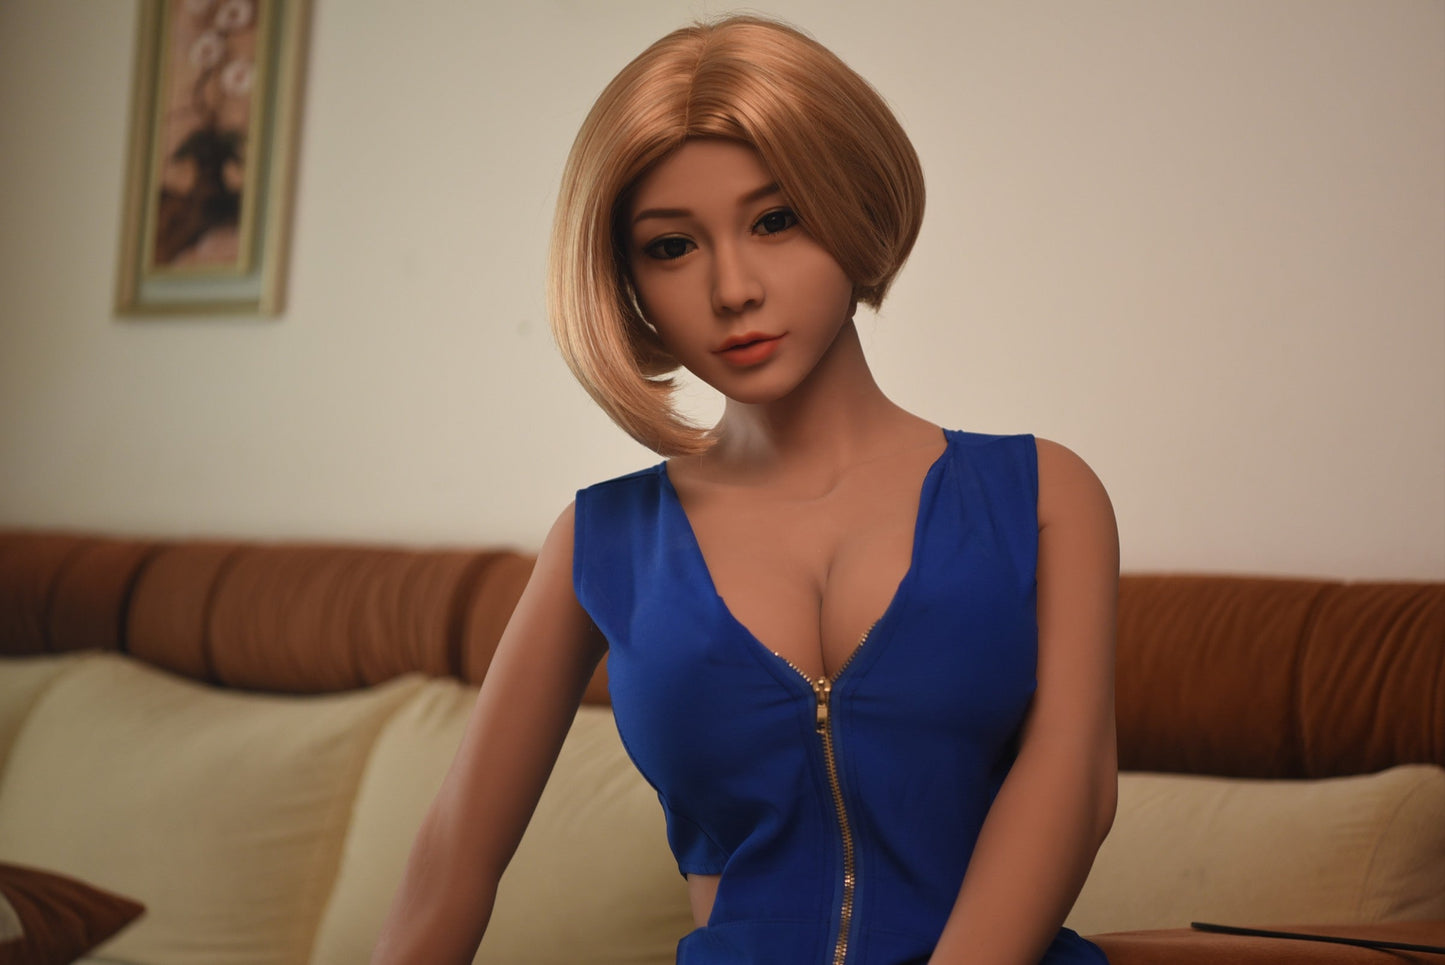 Experience Pleasure with Poppie: The Exquisite 161cm JS Sex Doll with a Hot Body and Gorgeous Curly Blond Hair